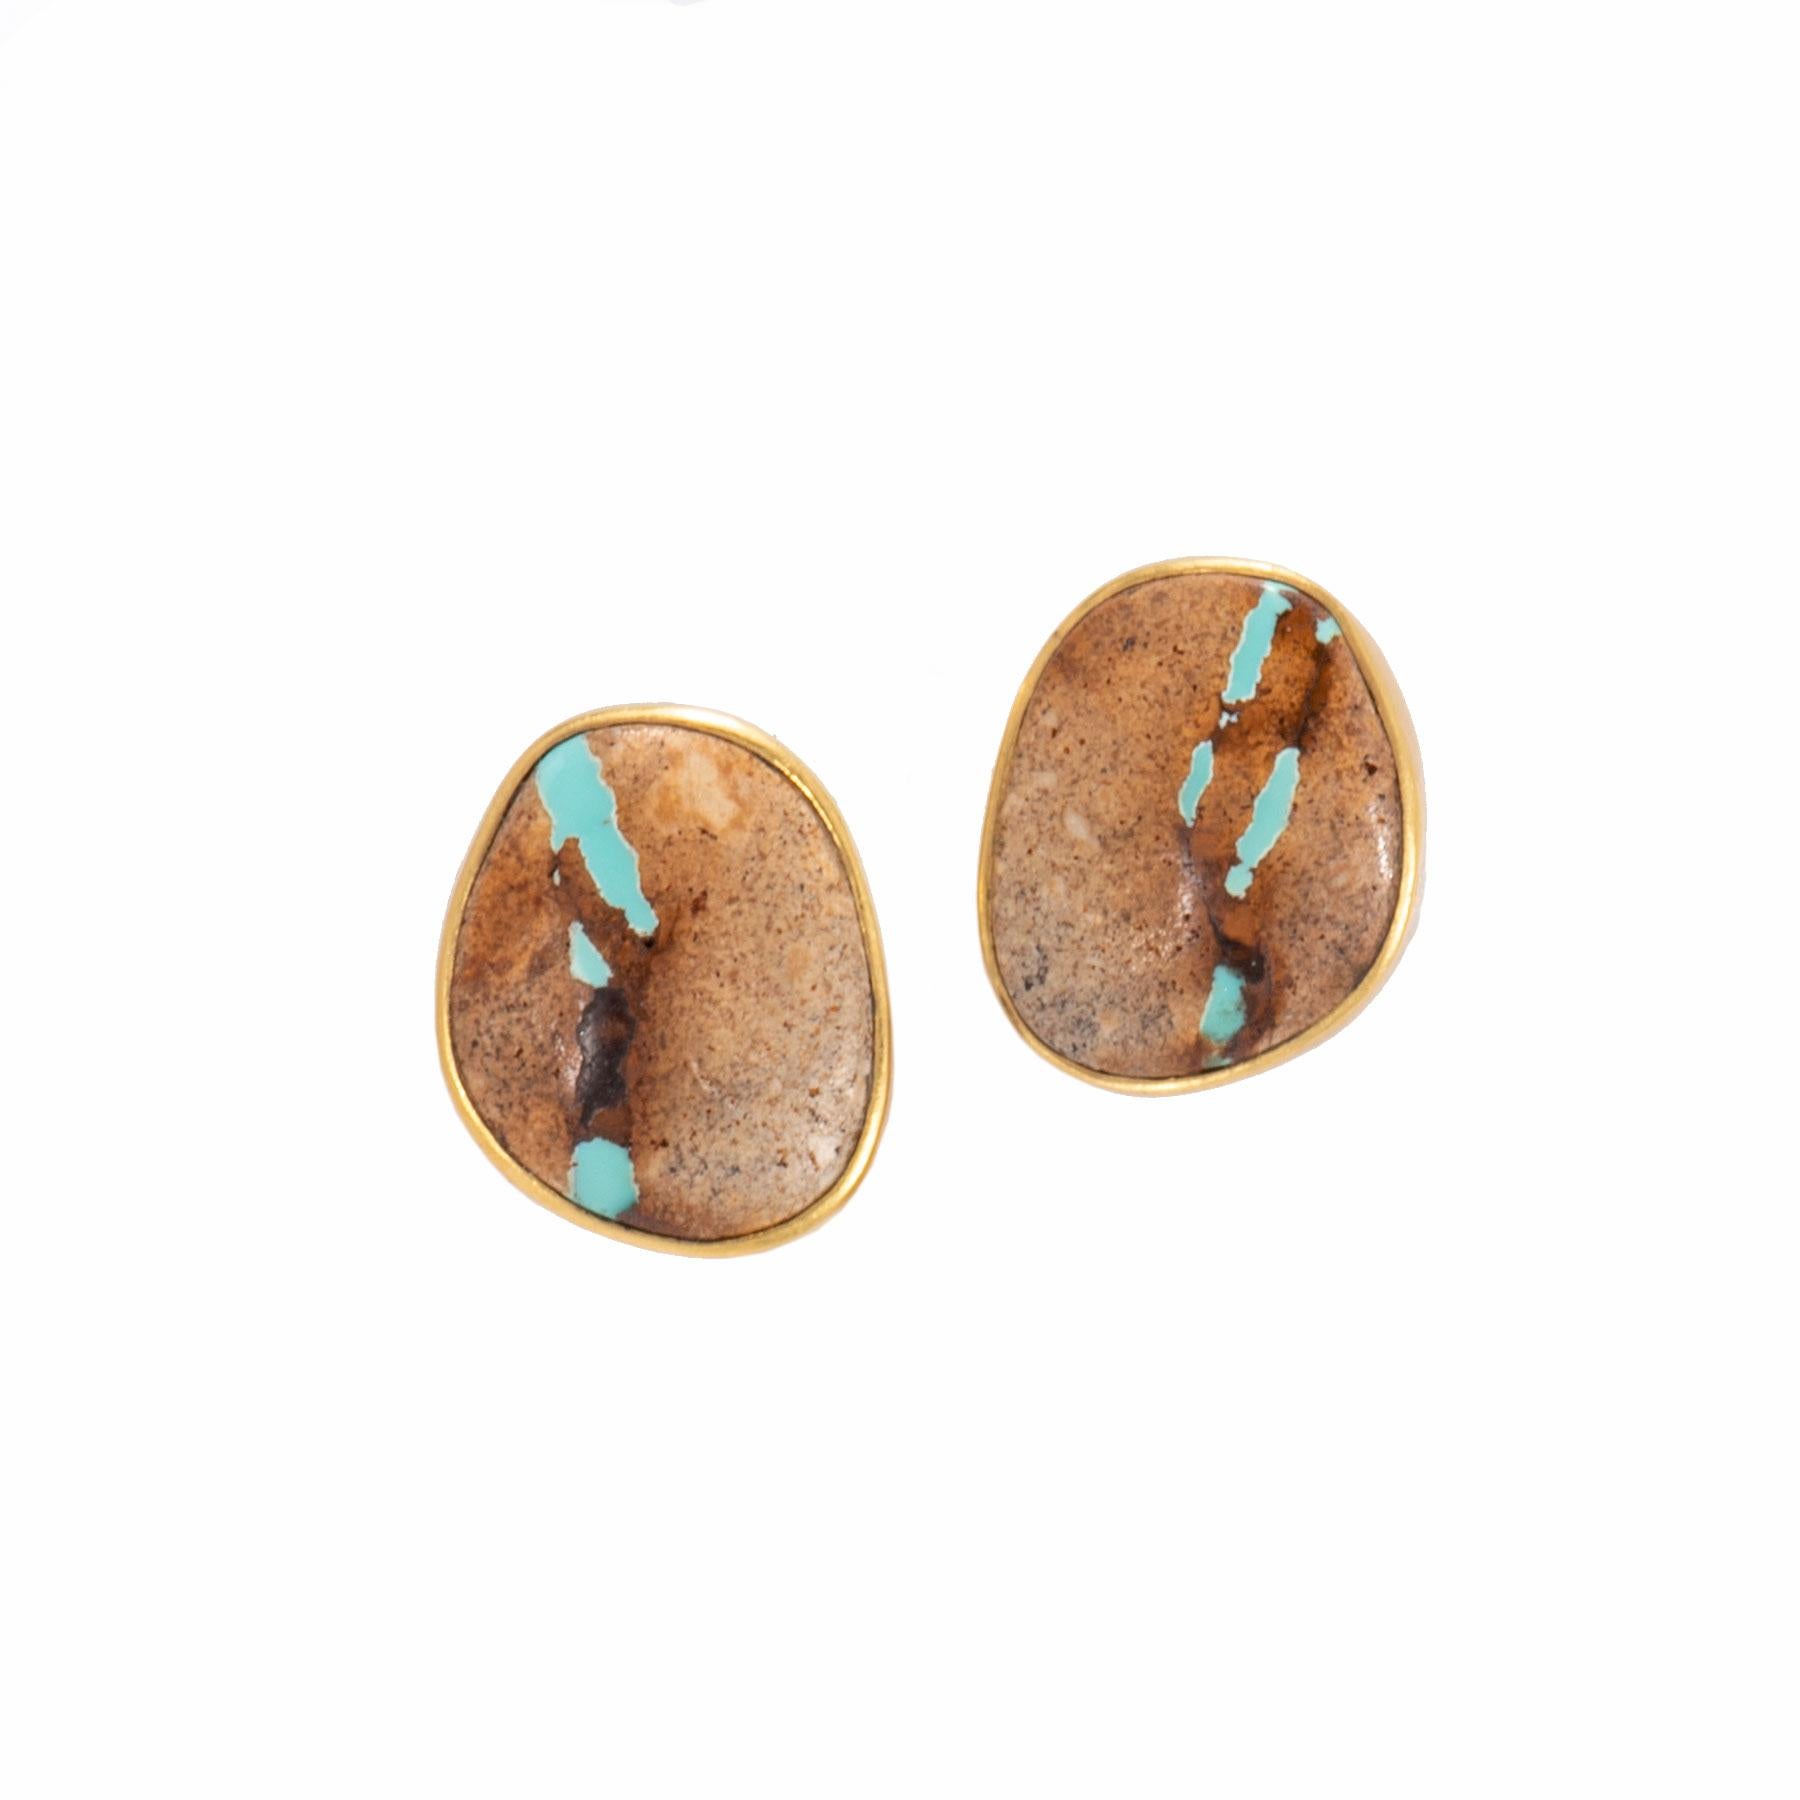 Boulder Turquoise Stud Earrings are bezel set in 22 karat gold with our signature satin finish to enhance the rich browns of the cabs and highlight blue veins of turquoise. Boulder Turquoise refers to the cut of the stone, whereby the stone cutter